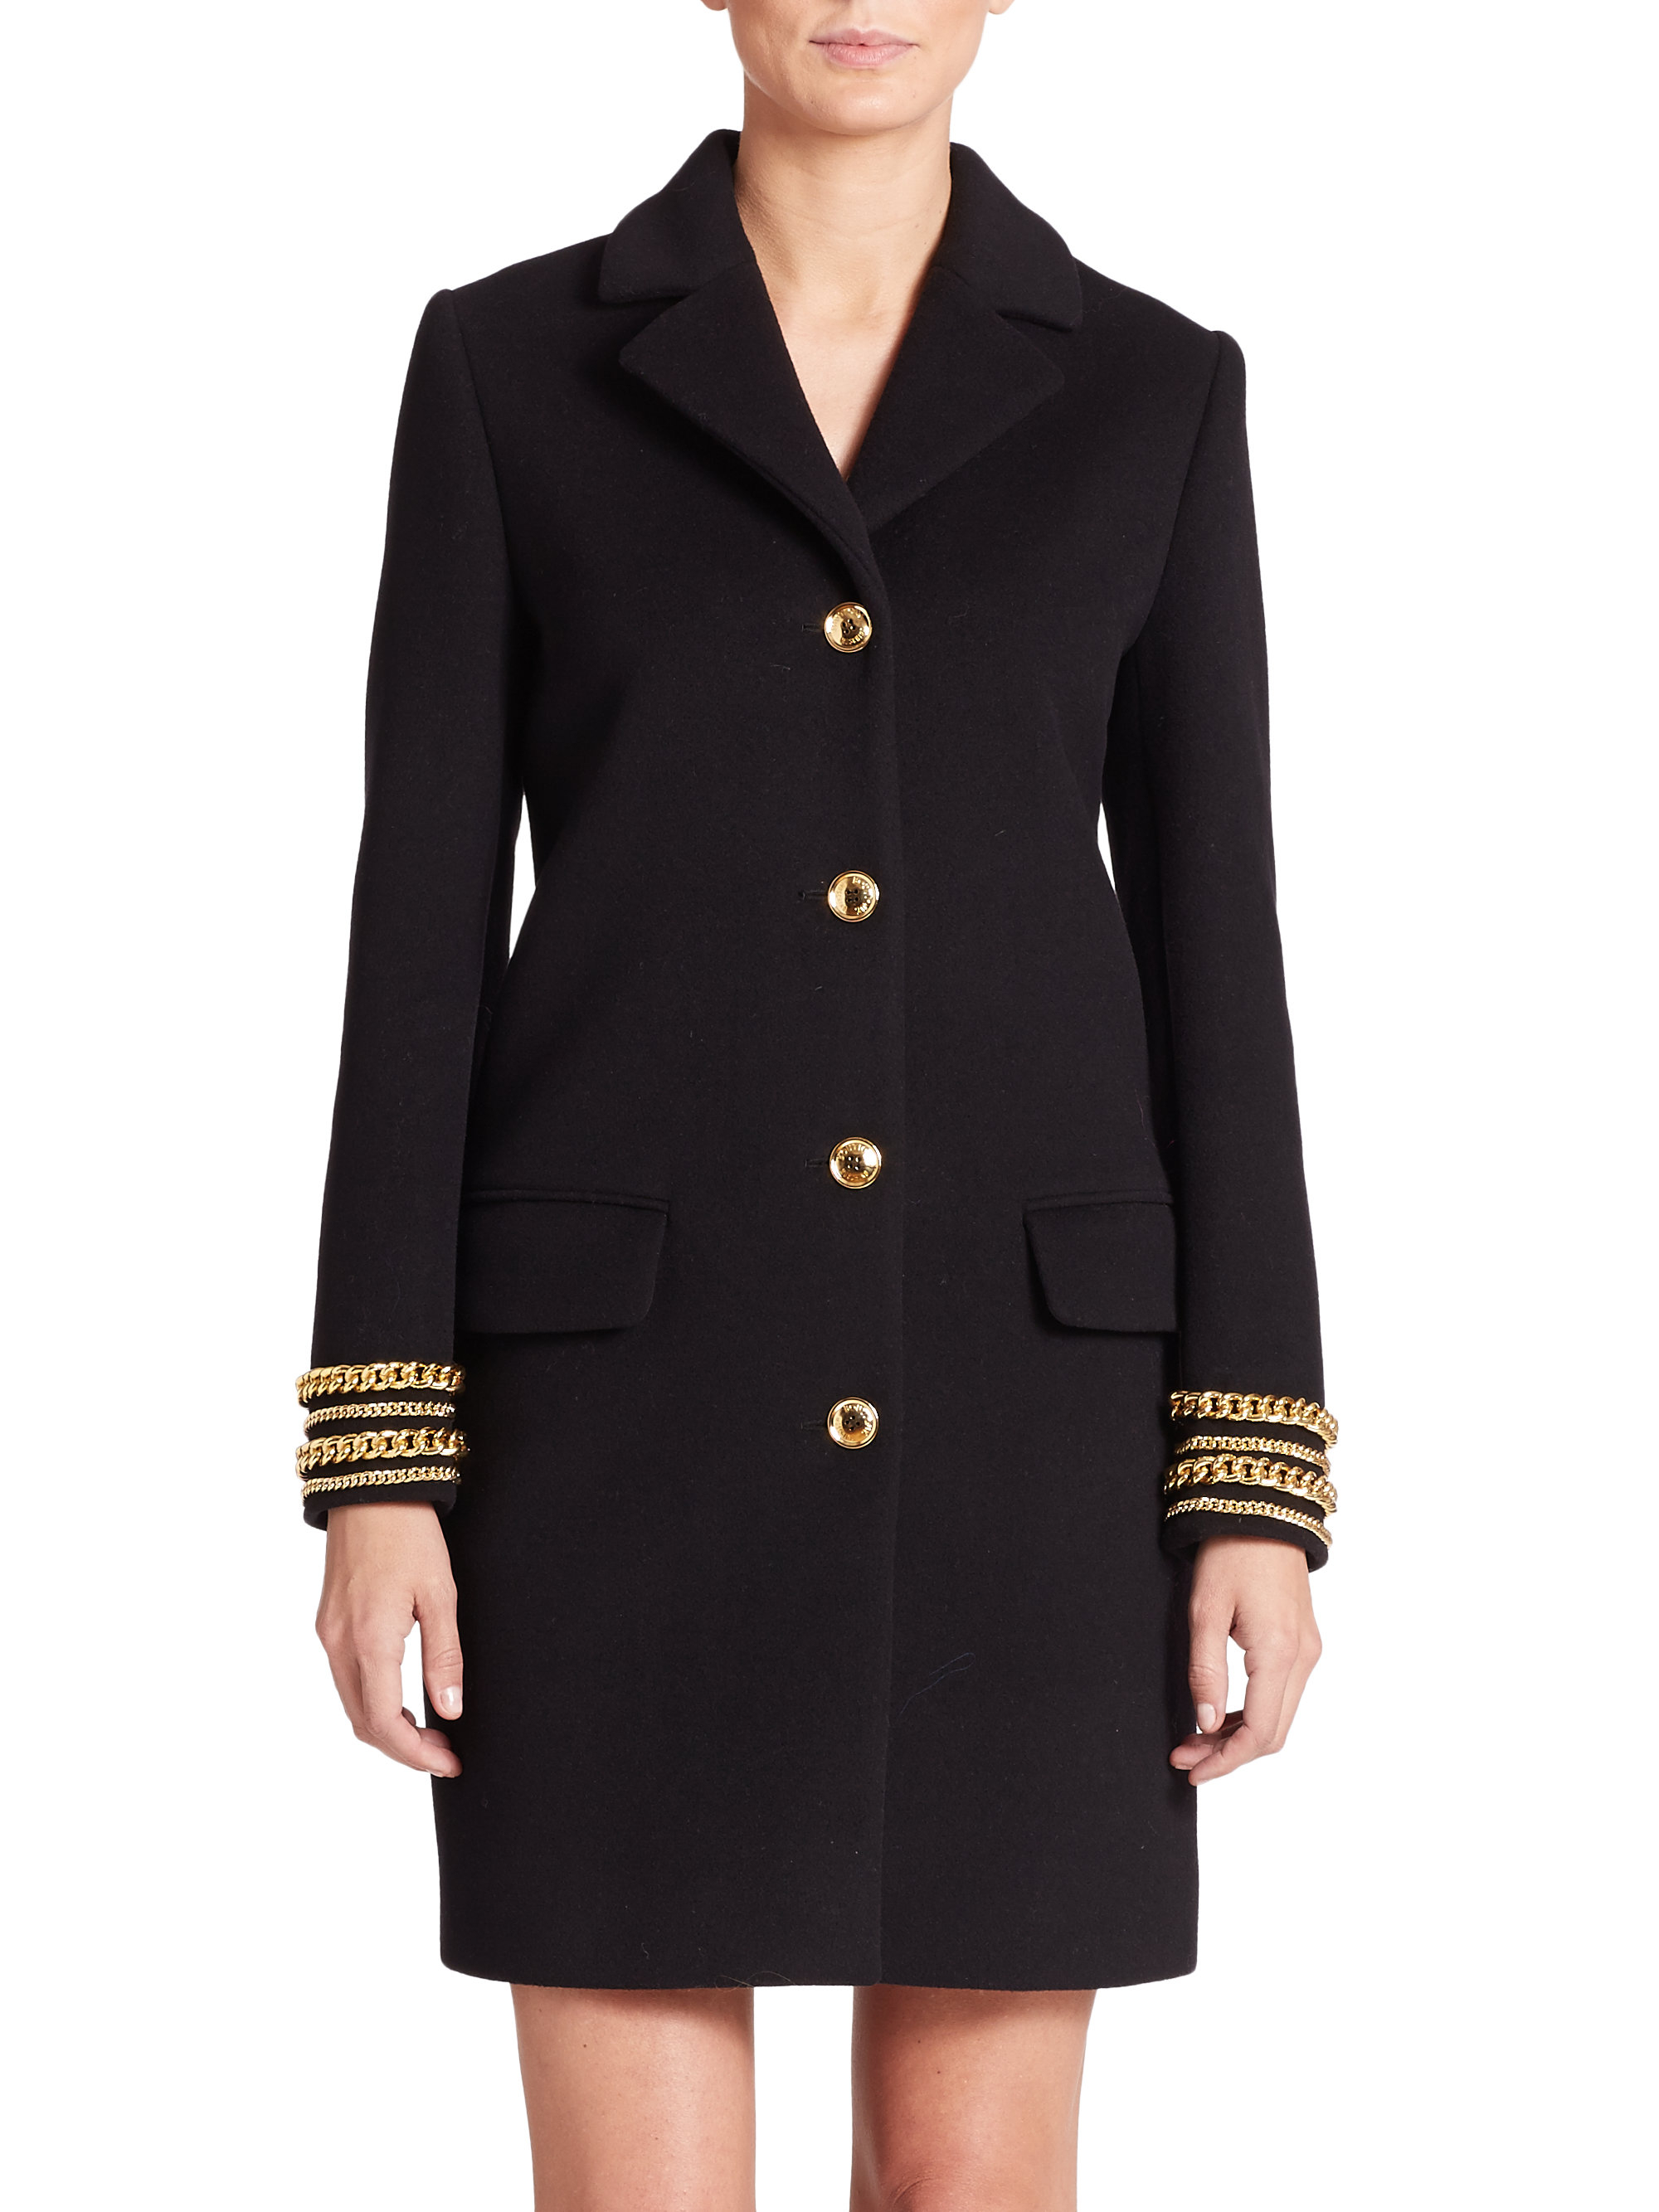 Lyst - Boutique Moschino Chain-trim Wool & Cashmere Coat in Black